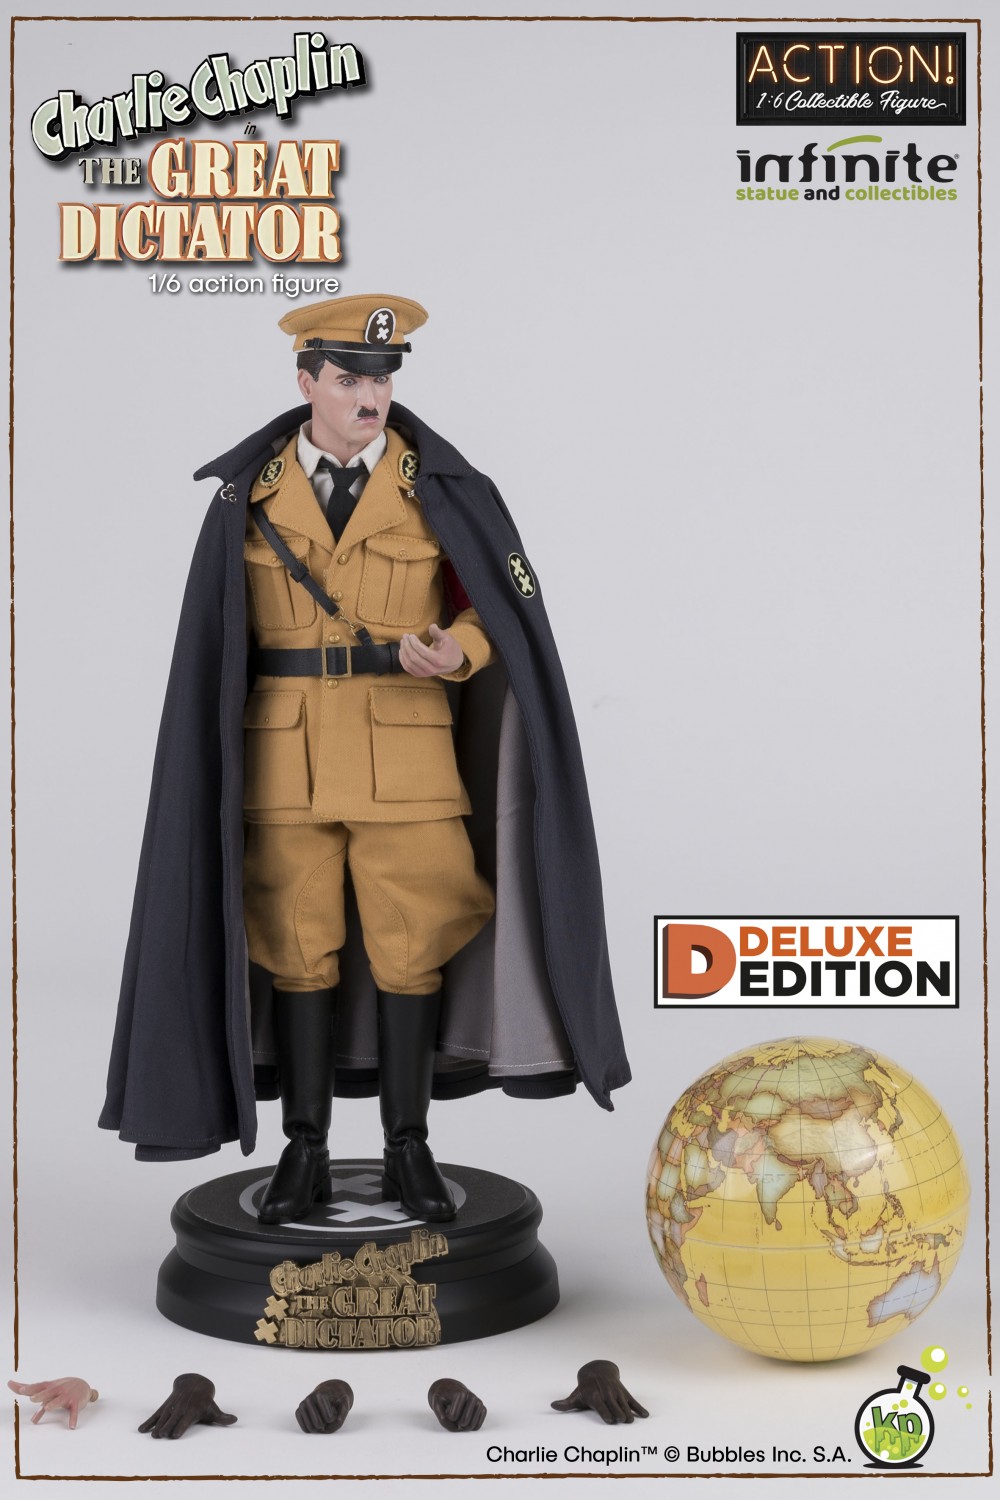 NEW PRODUCT: Infinite Statue & Kaustic Plastik: CHARLIE CHAPLIN “THE GREAT DICTATOR”  1/6 ACTION FIGURE 10456